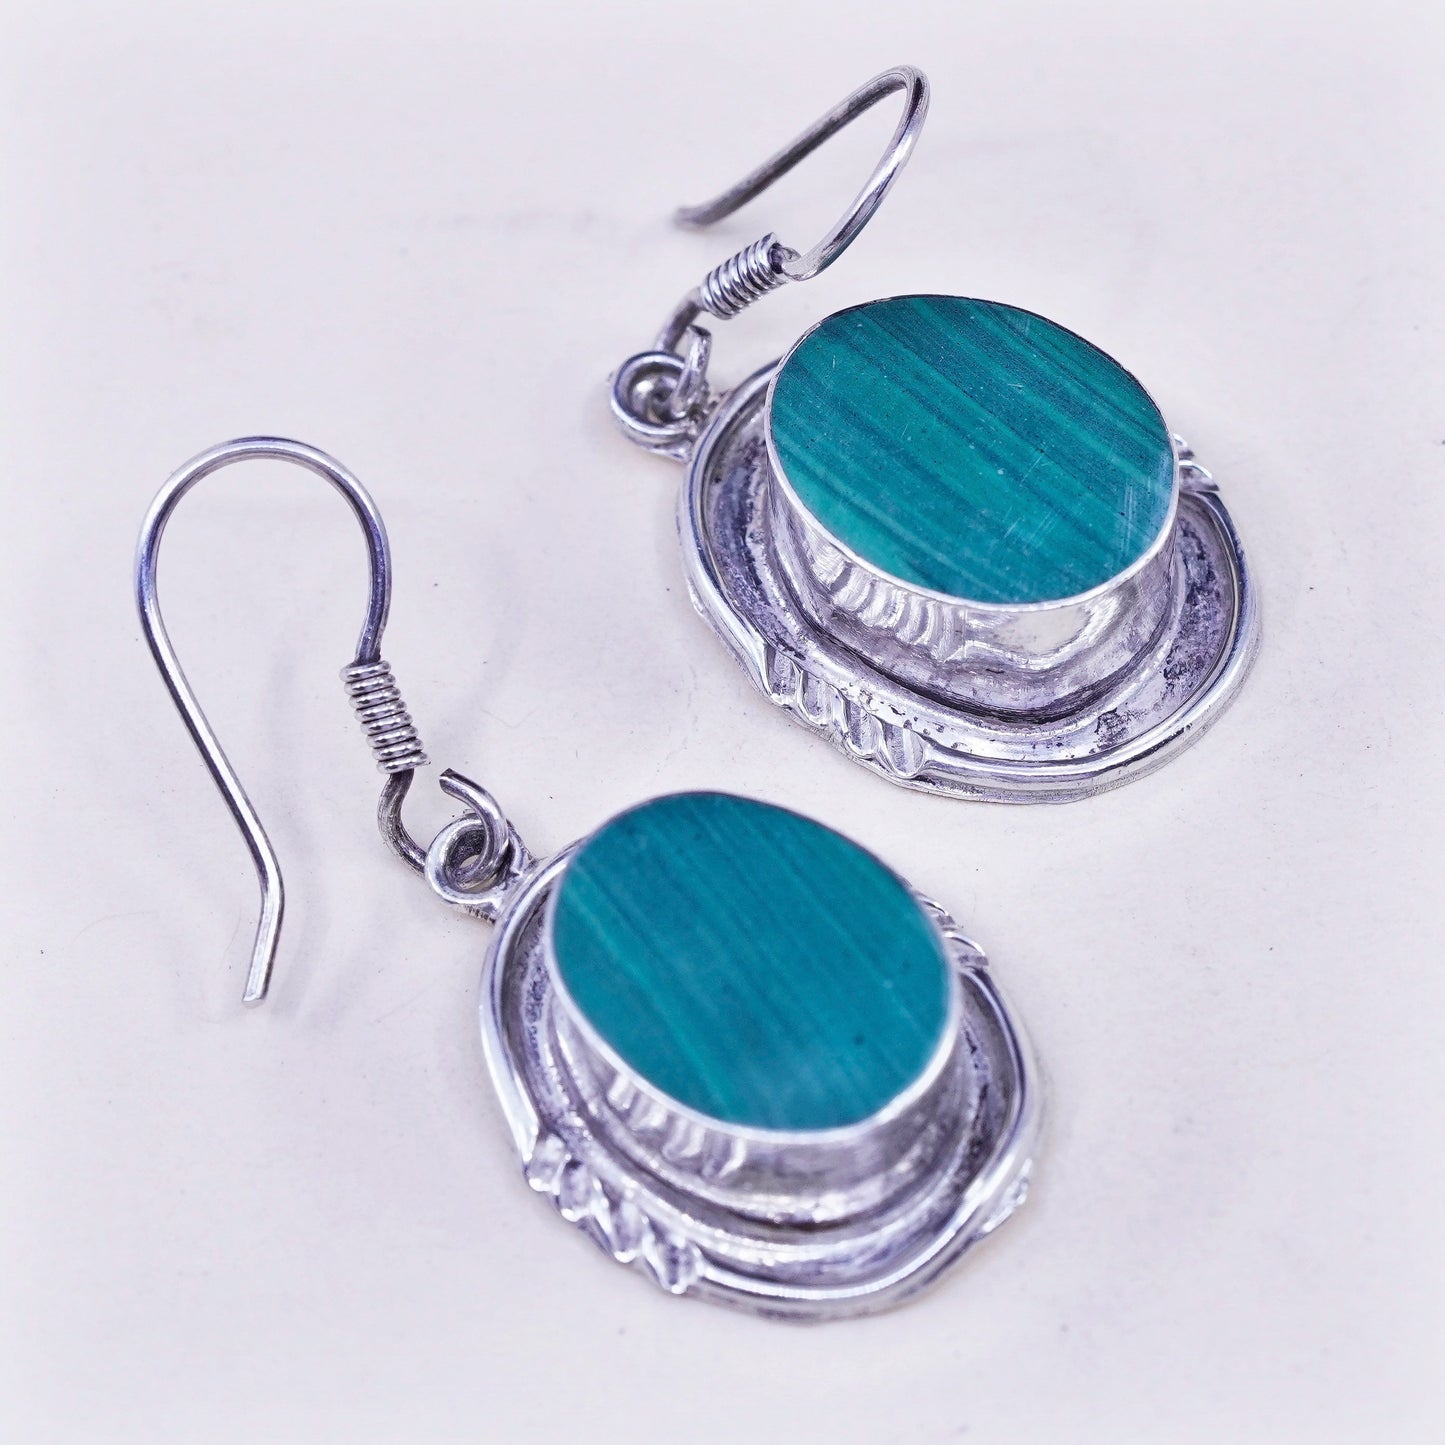 Vintage Mexico sterling 925 silver handmade earrings with oval malachite